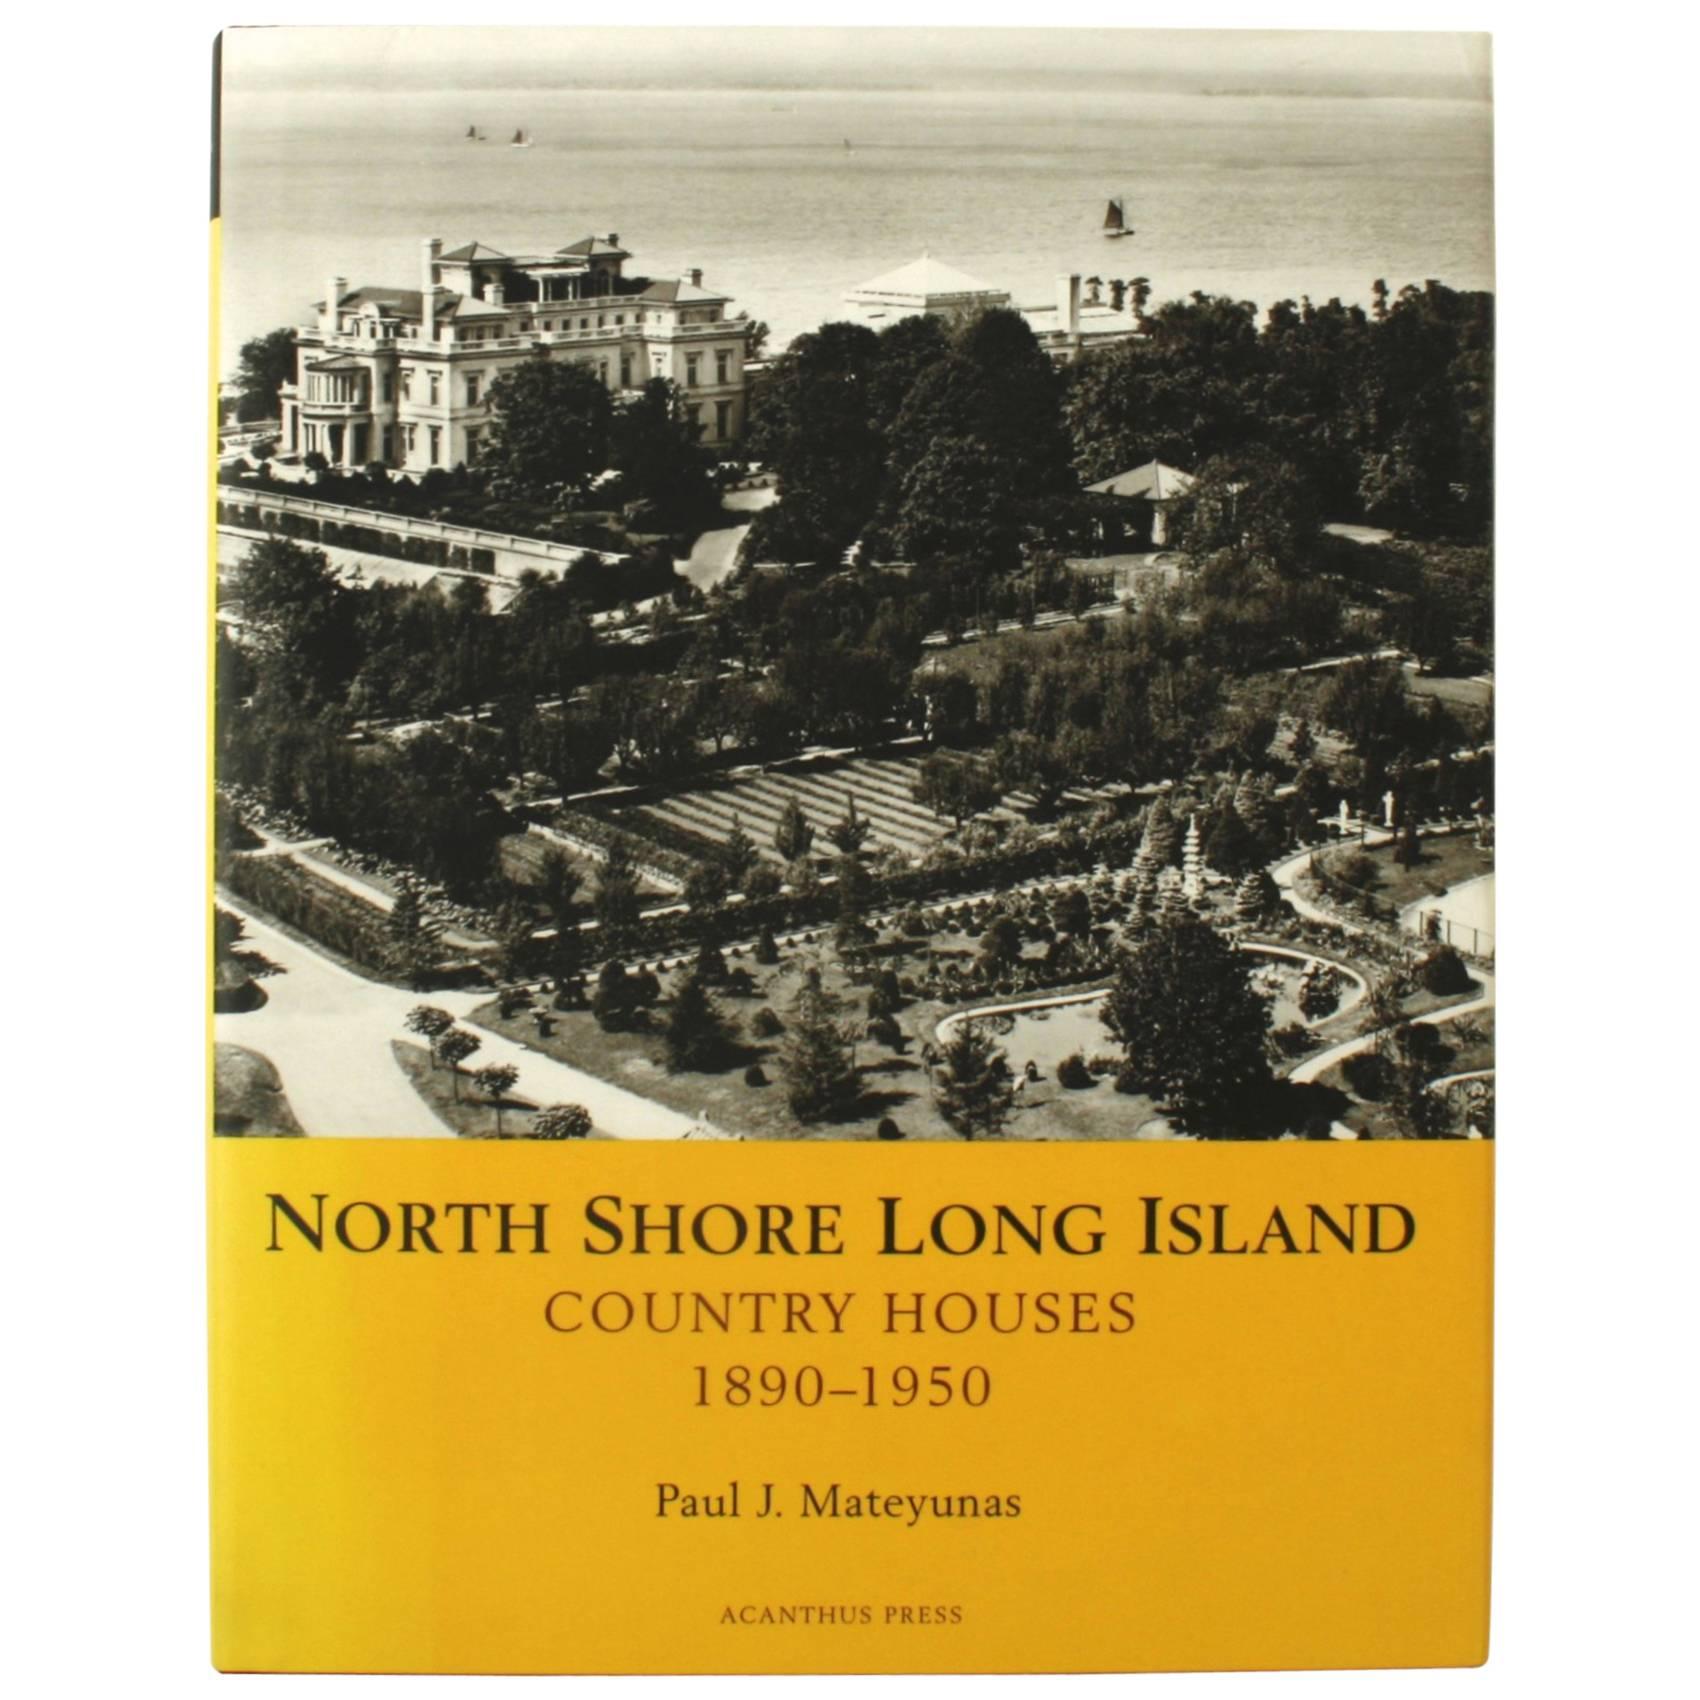 North Shore Long Island Country Houses, 1890-1950, 1st Ed by Paul J. Mateyunas For Sale